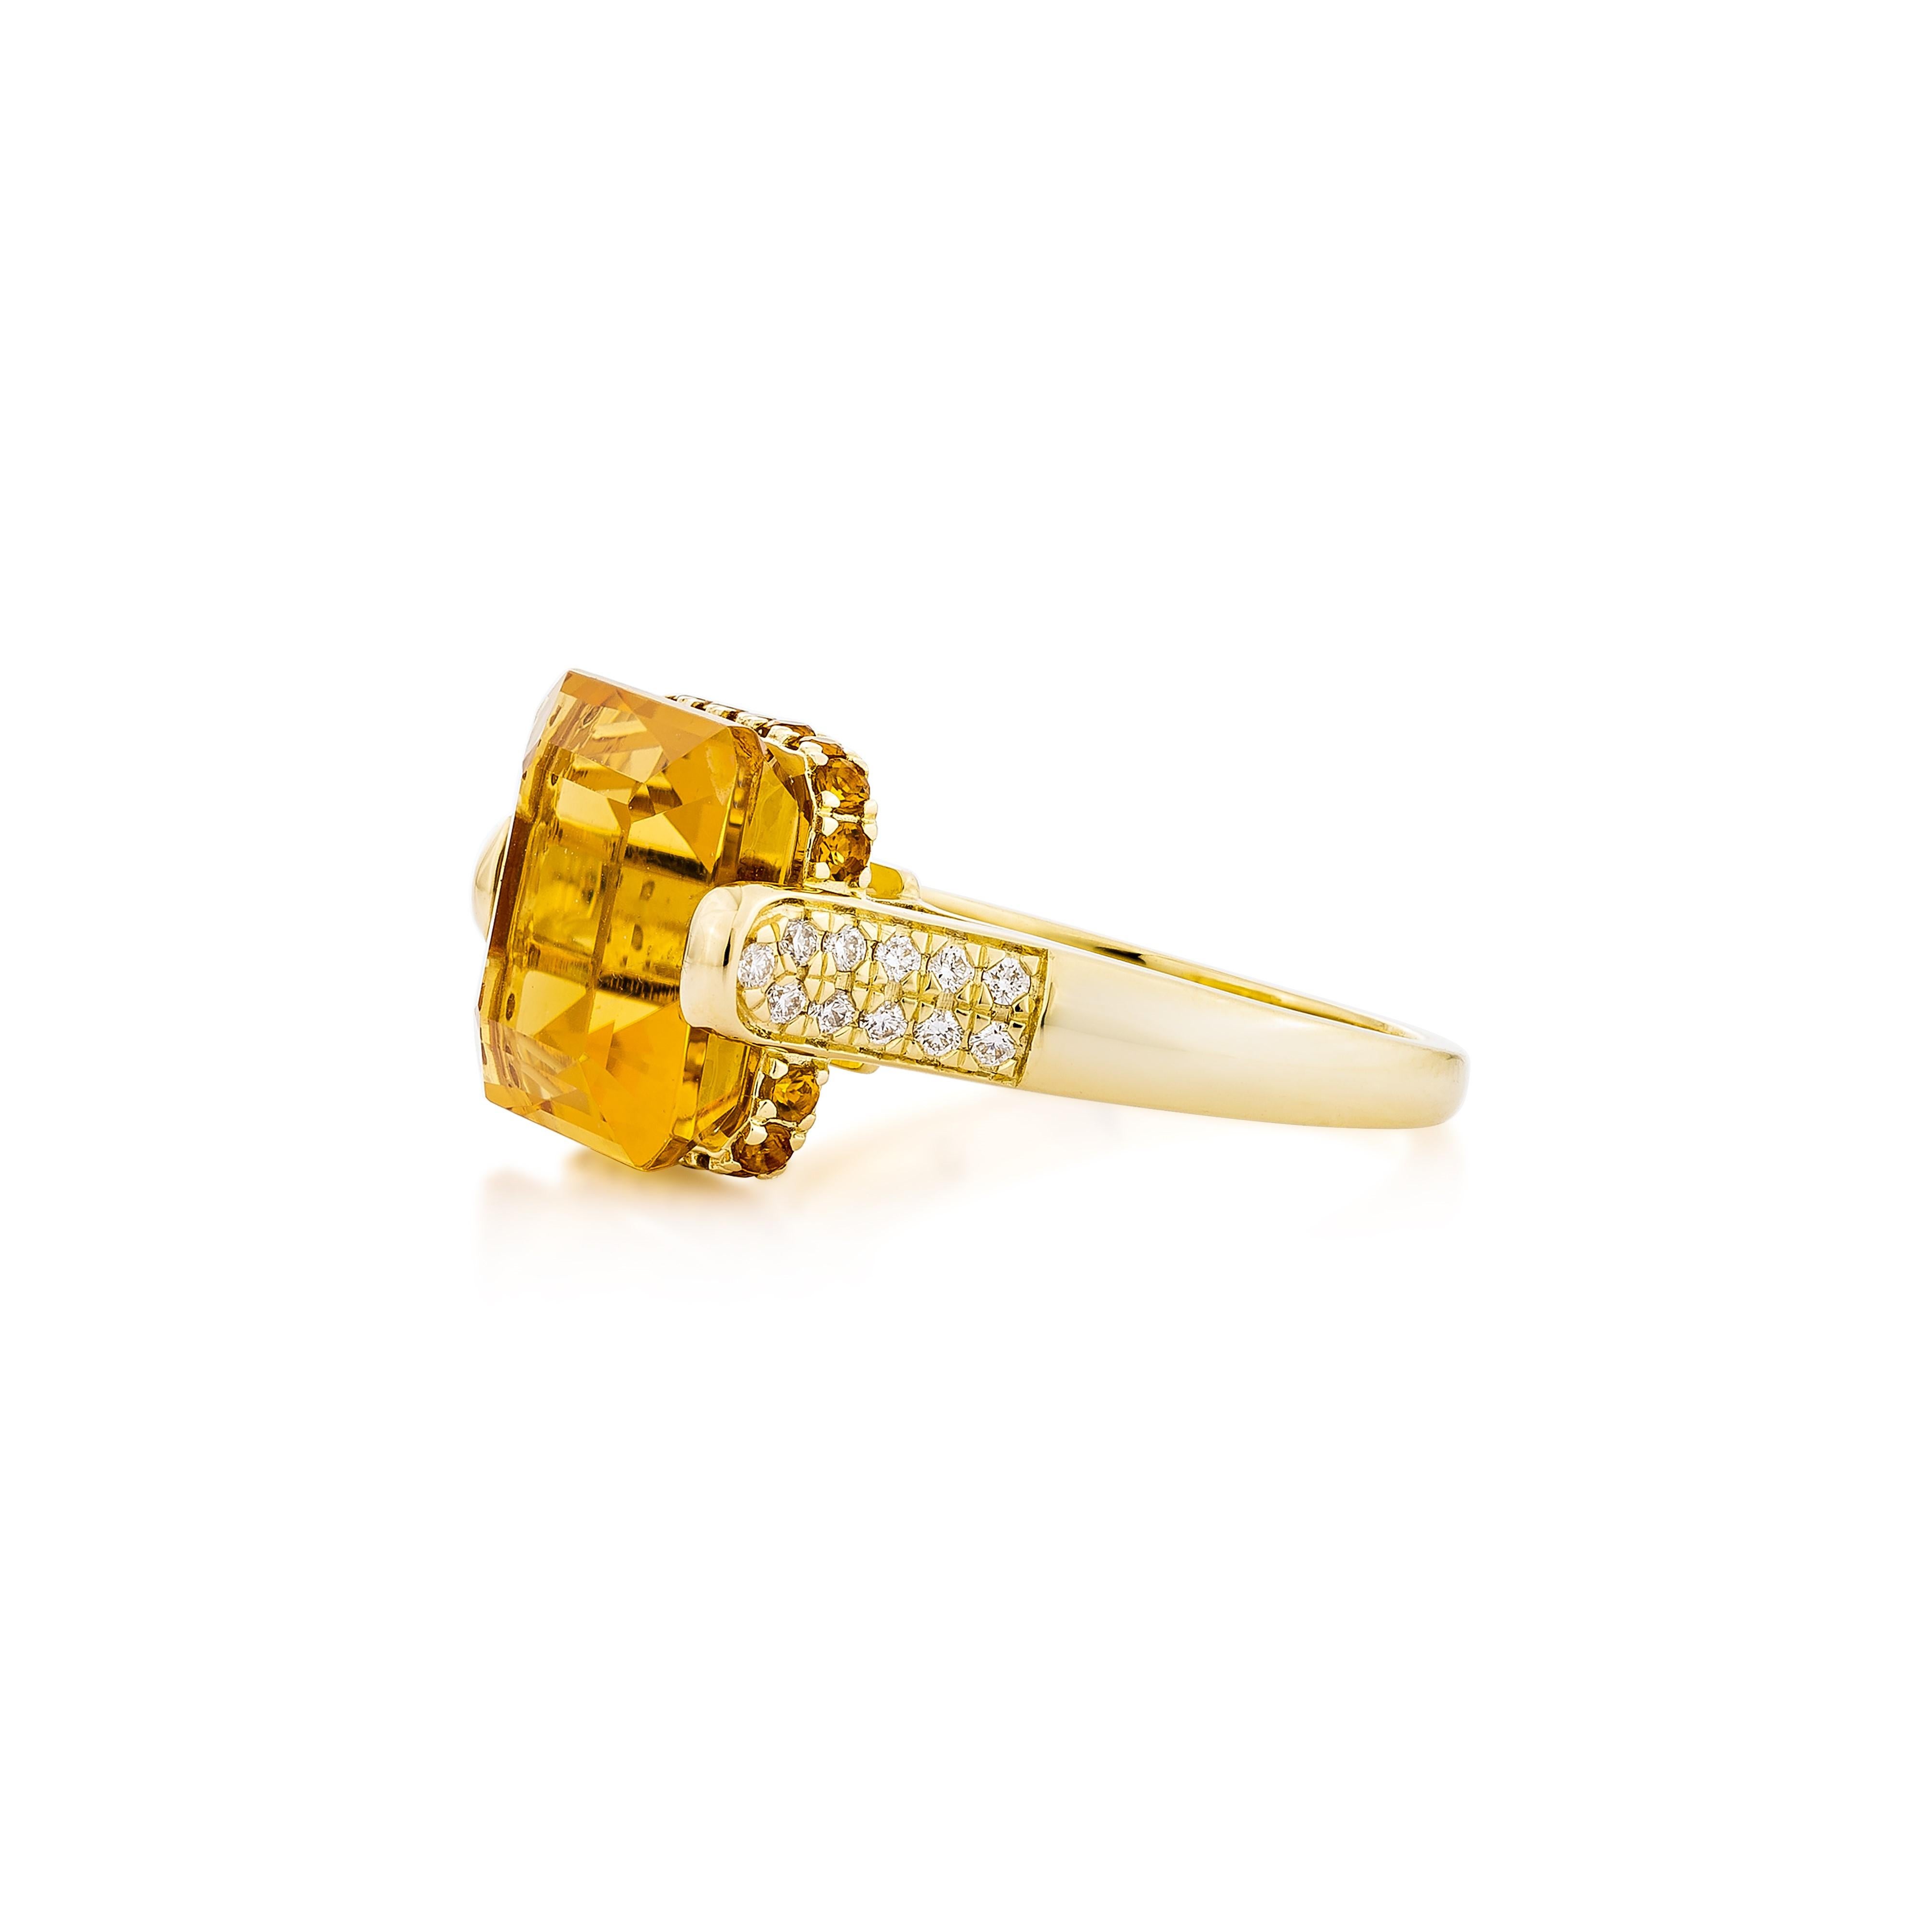 Octagon Cut 7.92 Carat Citrine Fancy Ring in 18Karat Yellow Gold with White Diamond.   For Sale